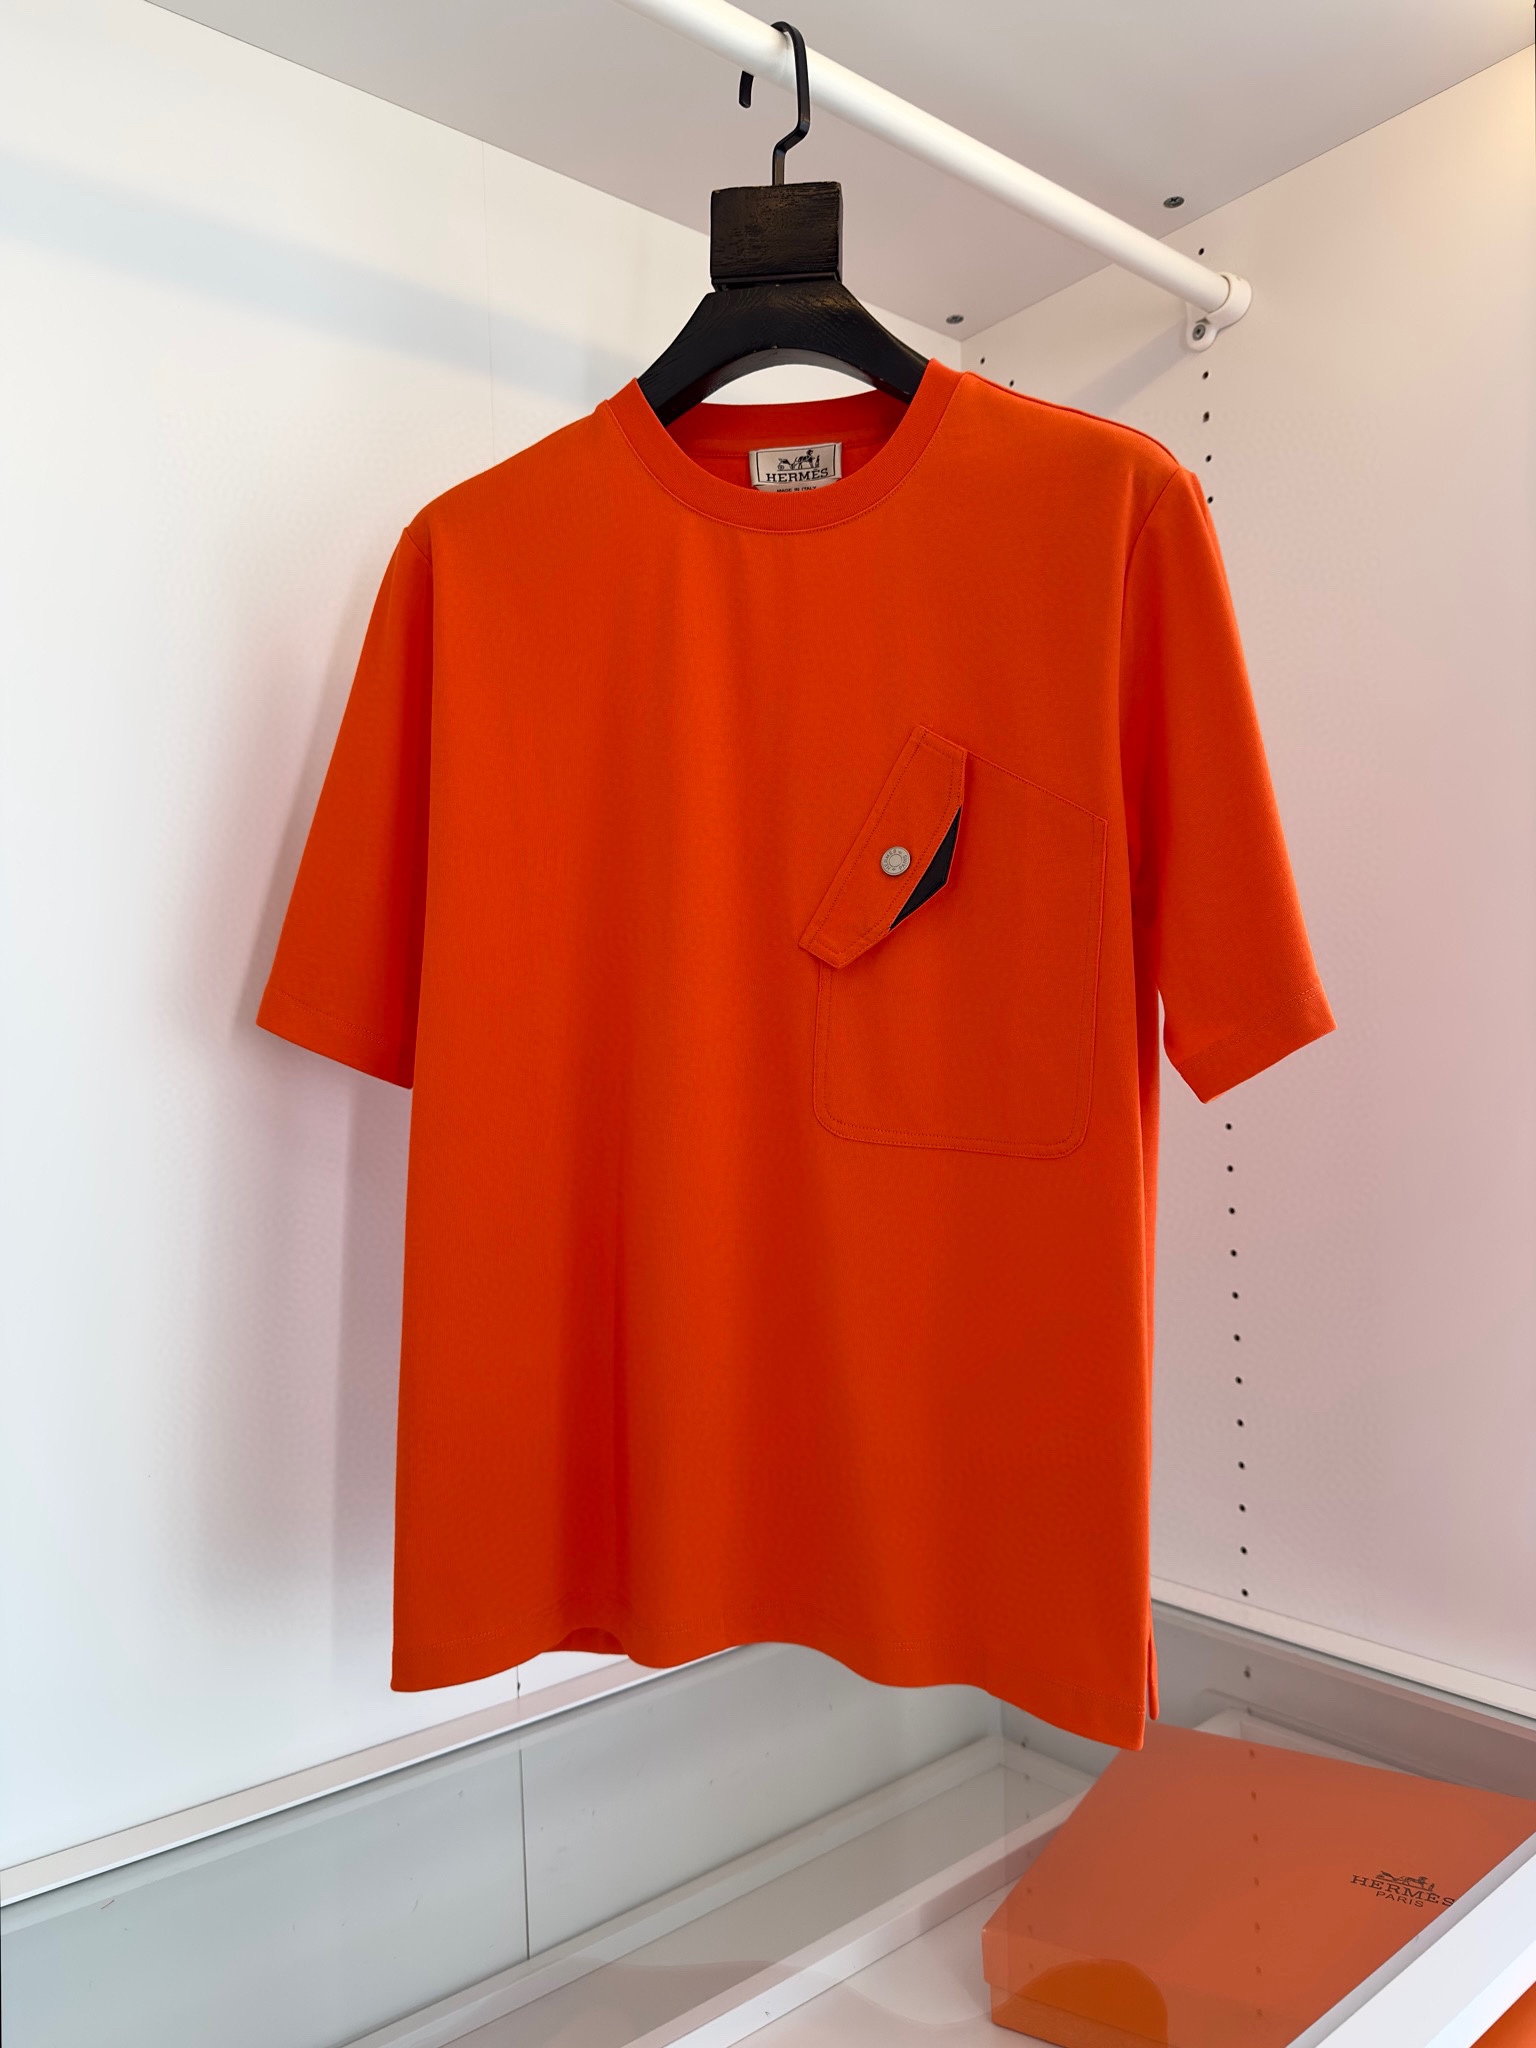 Hermes Clothing T-Shirt Best Replica New Style
 Beige Green Orange White Cotton Spring/Summer Collection Fashion Short Sleeve